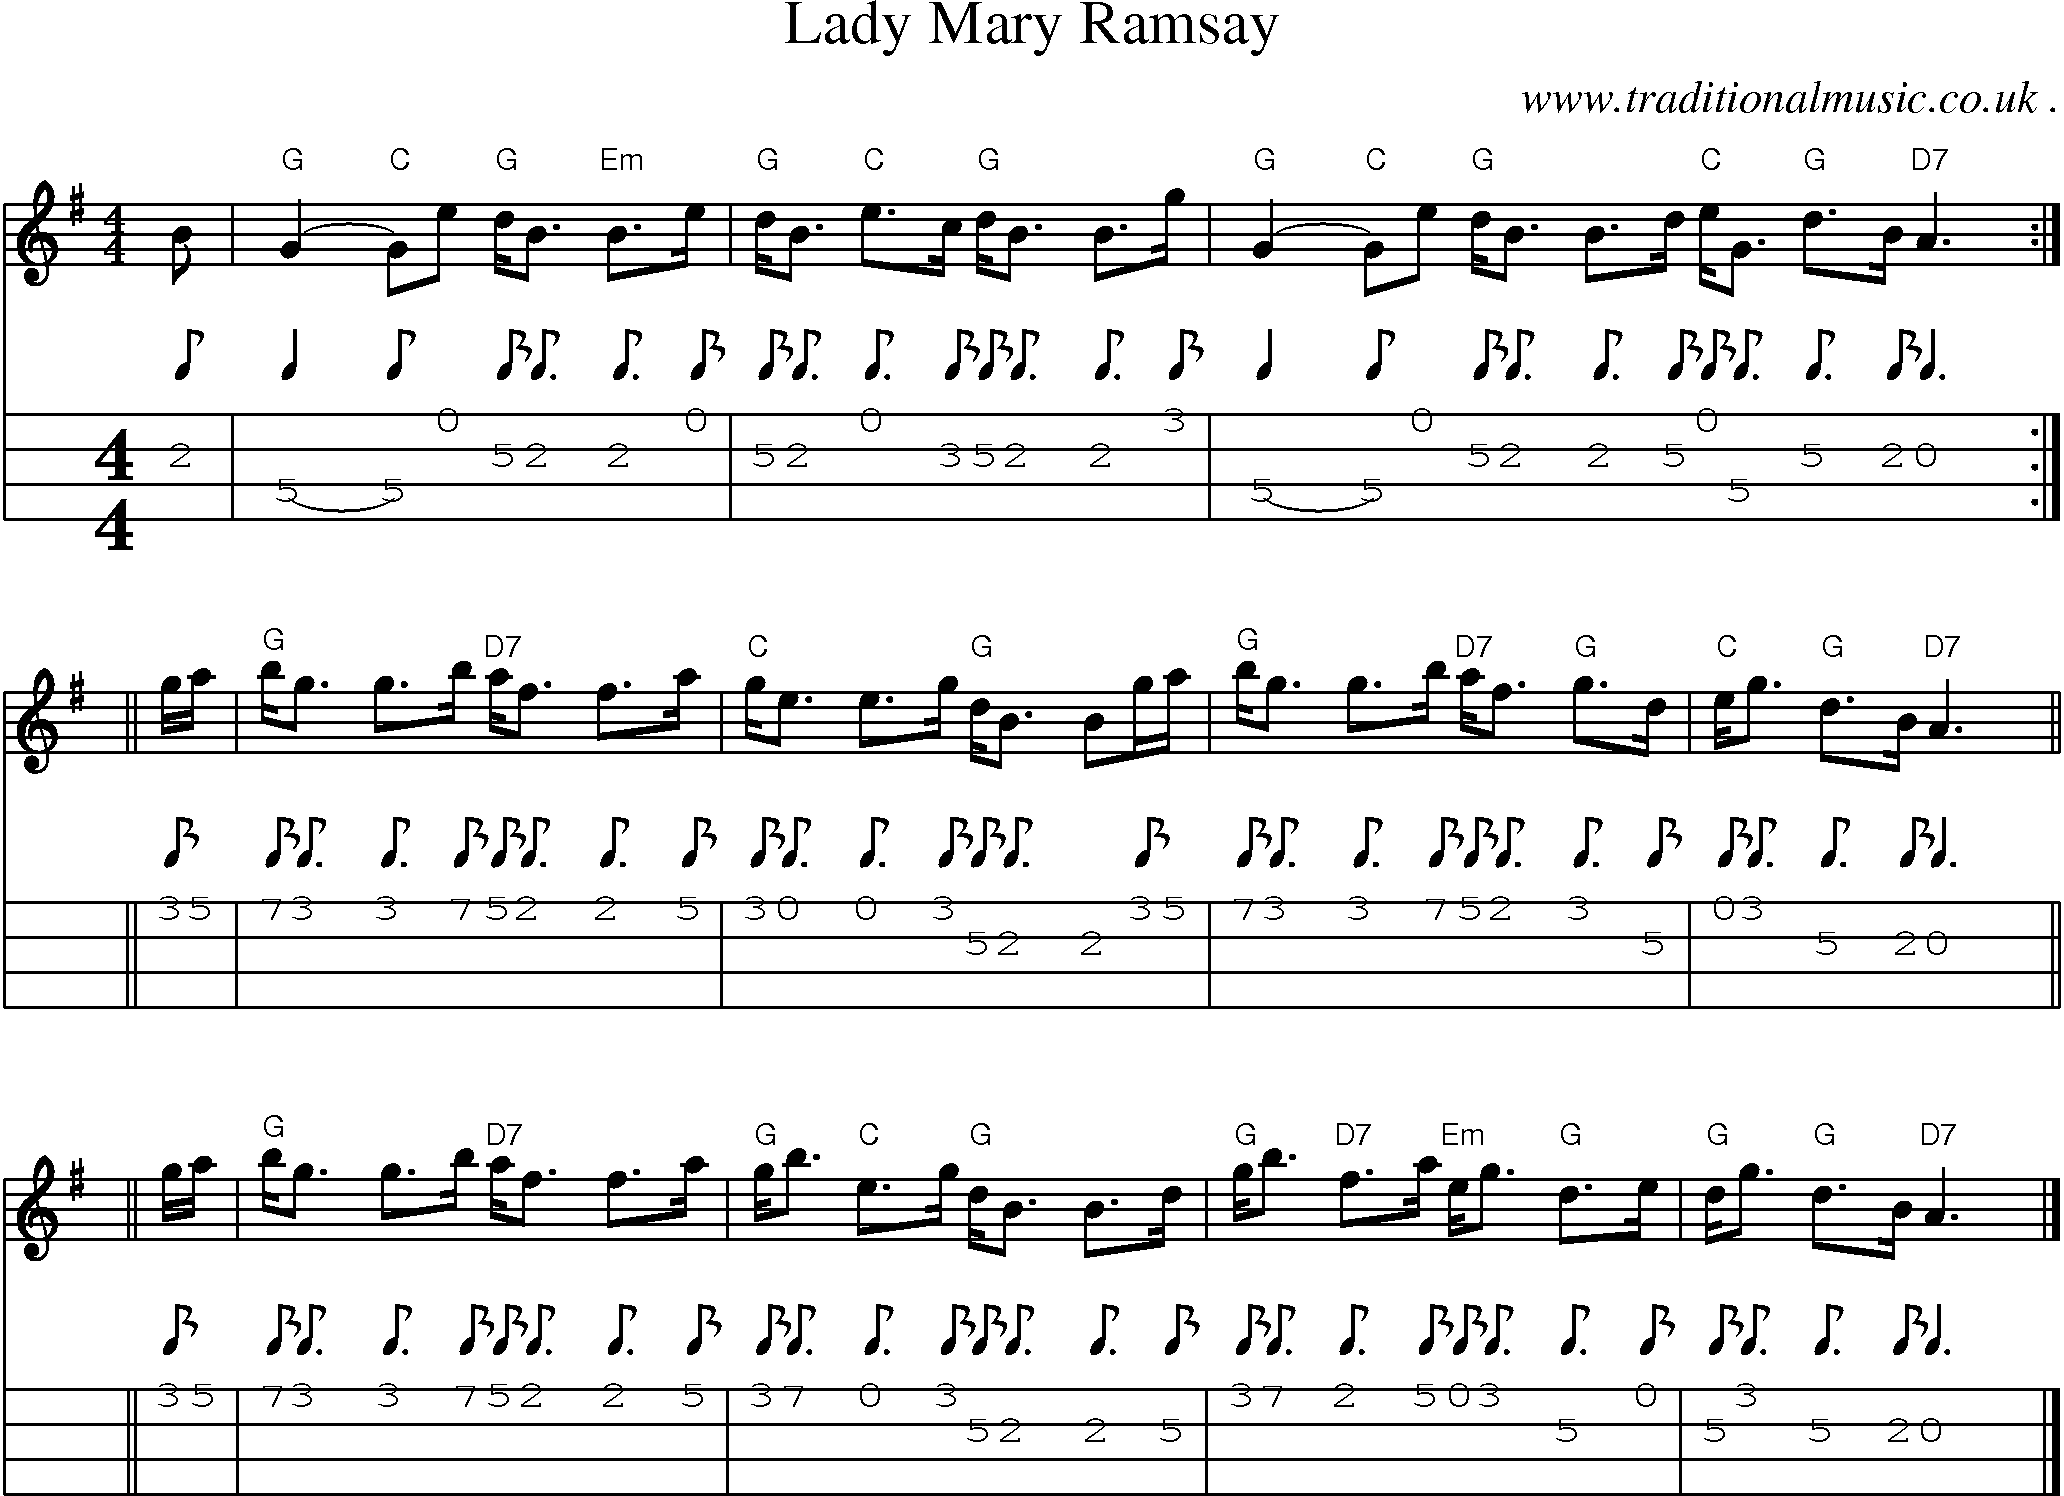 Sheet-music  score, Chords and Mandolin Tabs for Lady Mary Ramsay